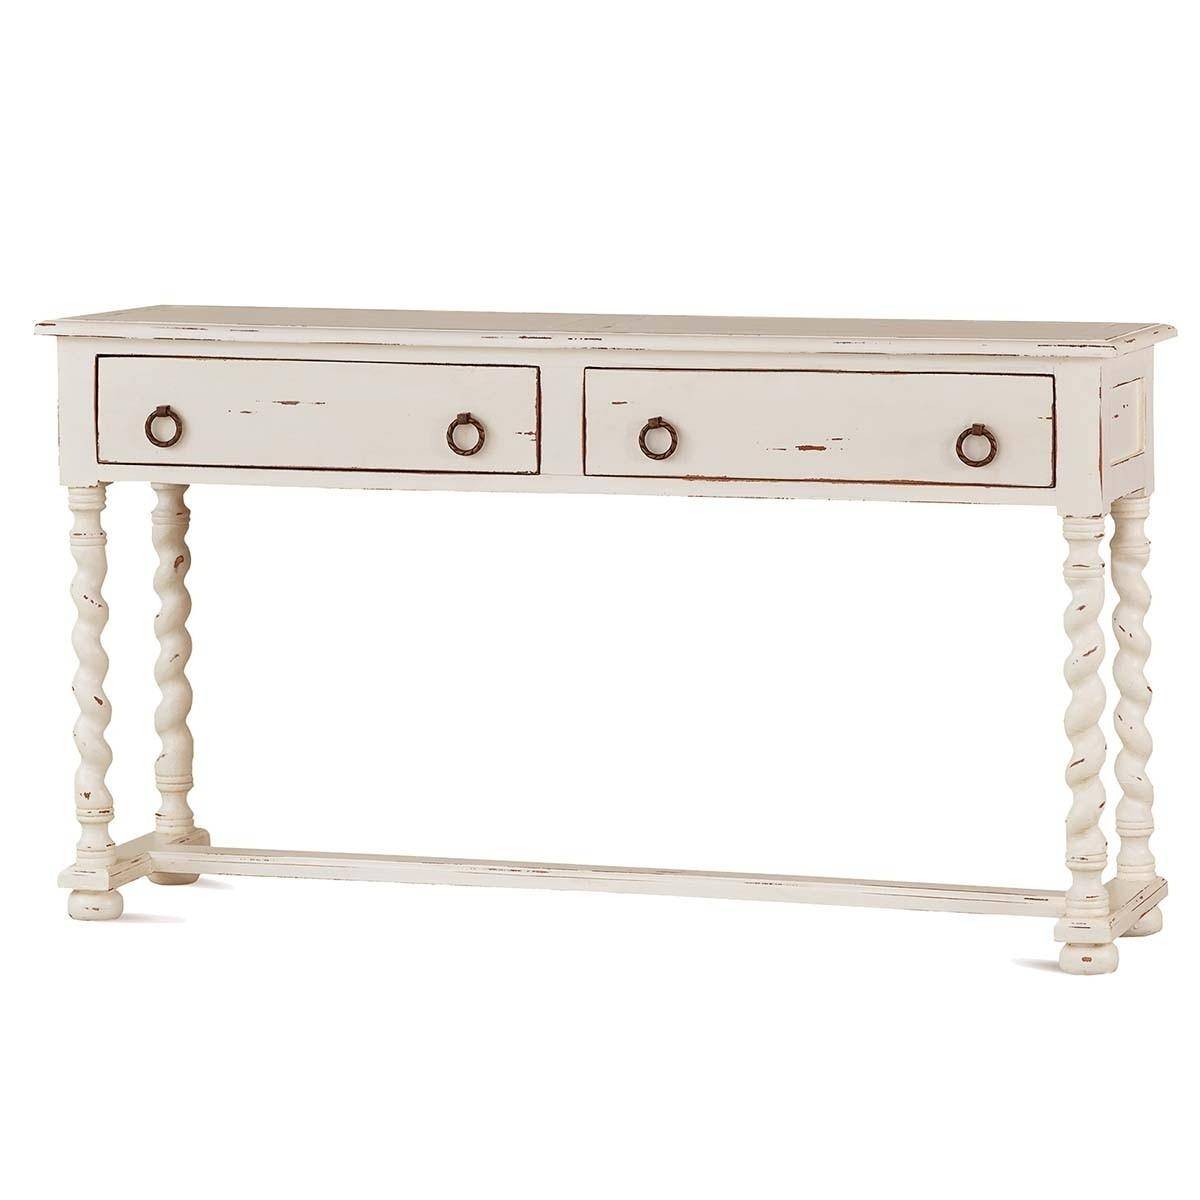 Bramble 26081 Console Table In Antique, Antique White Console Table With Drawers